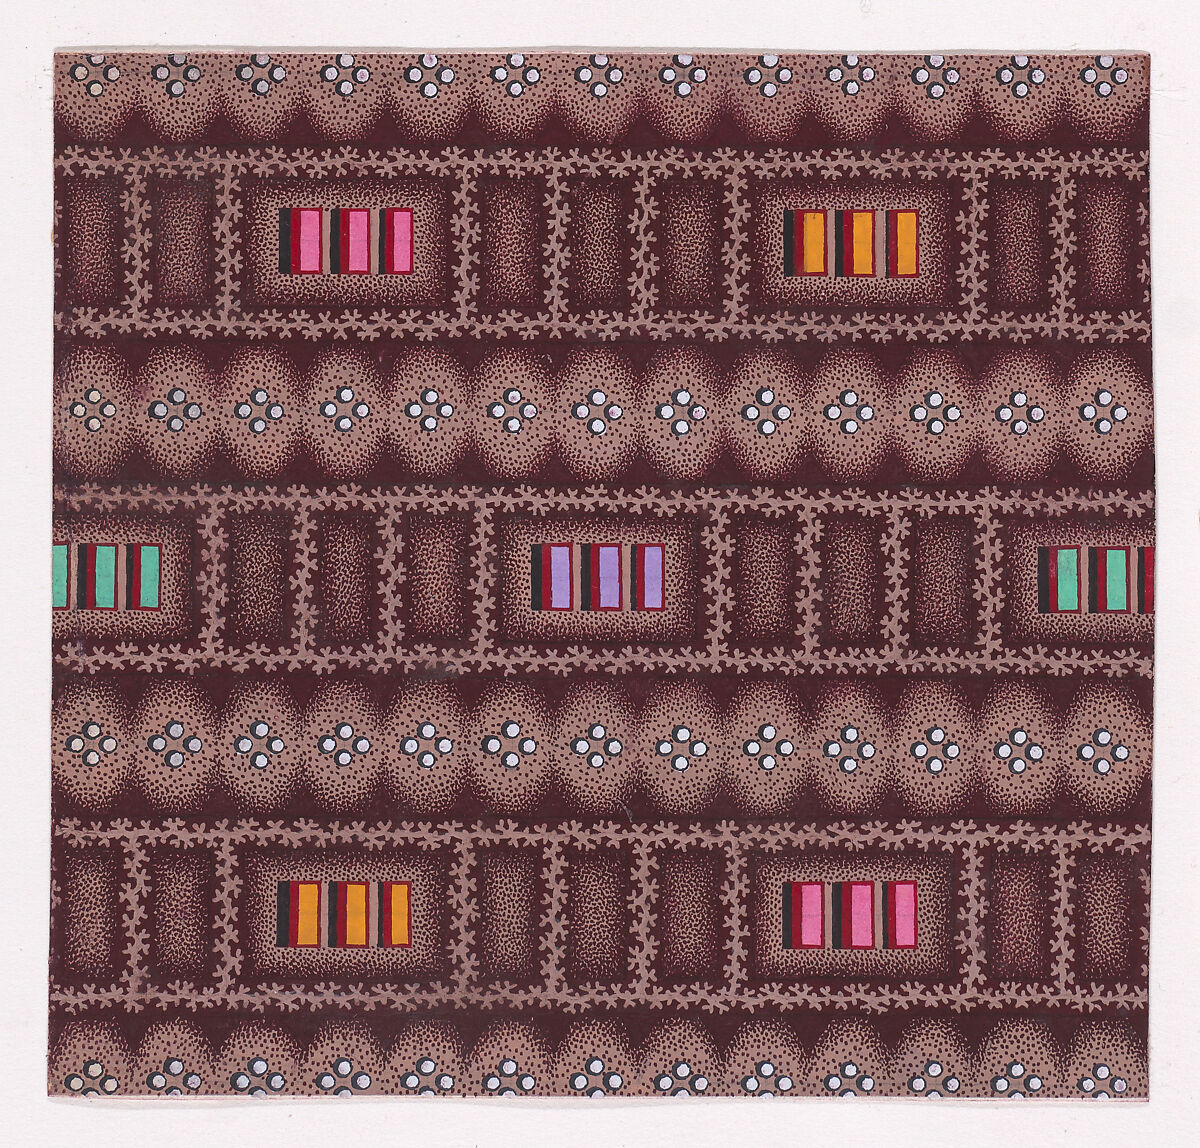 Textile Design with Horizontal Rows of Groups of Three Rectangles Framed by Garlands of Branches and Separated by Rows of Groups of Four Pearls, Anonymous, Alsatian, 19th century, Gouache 